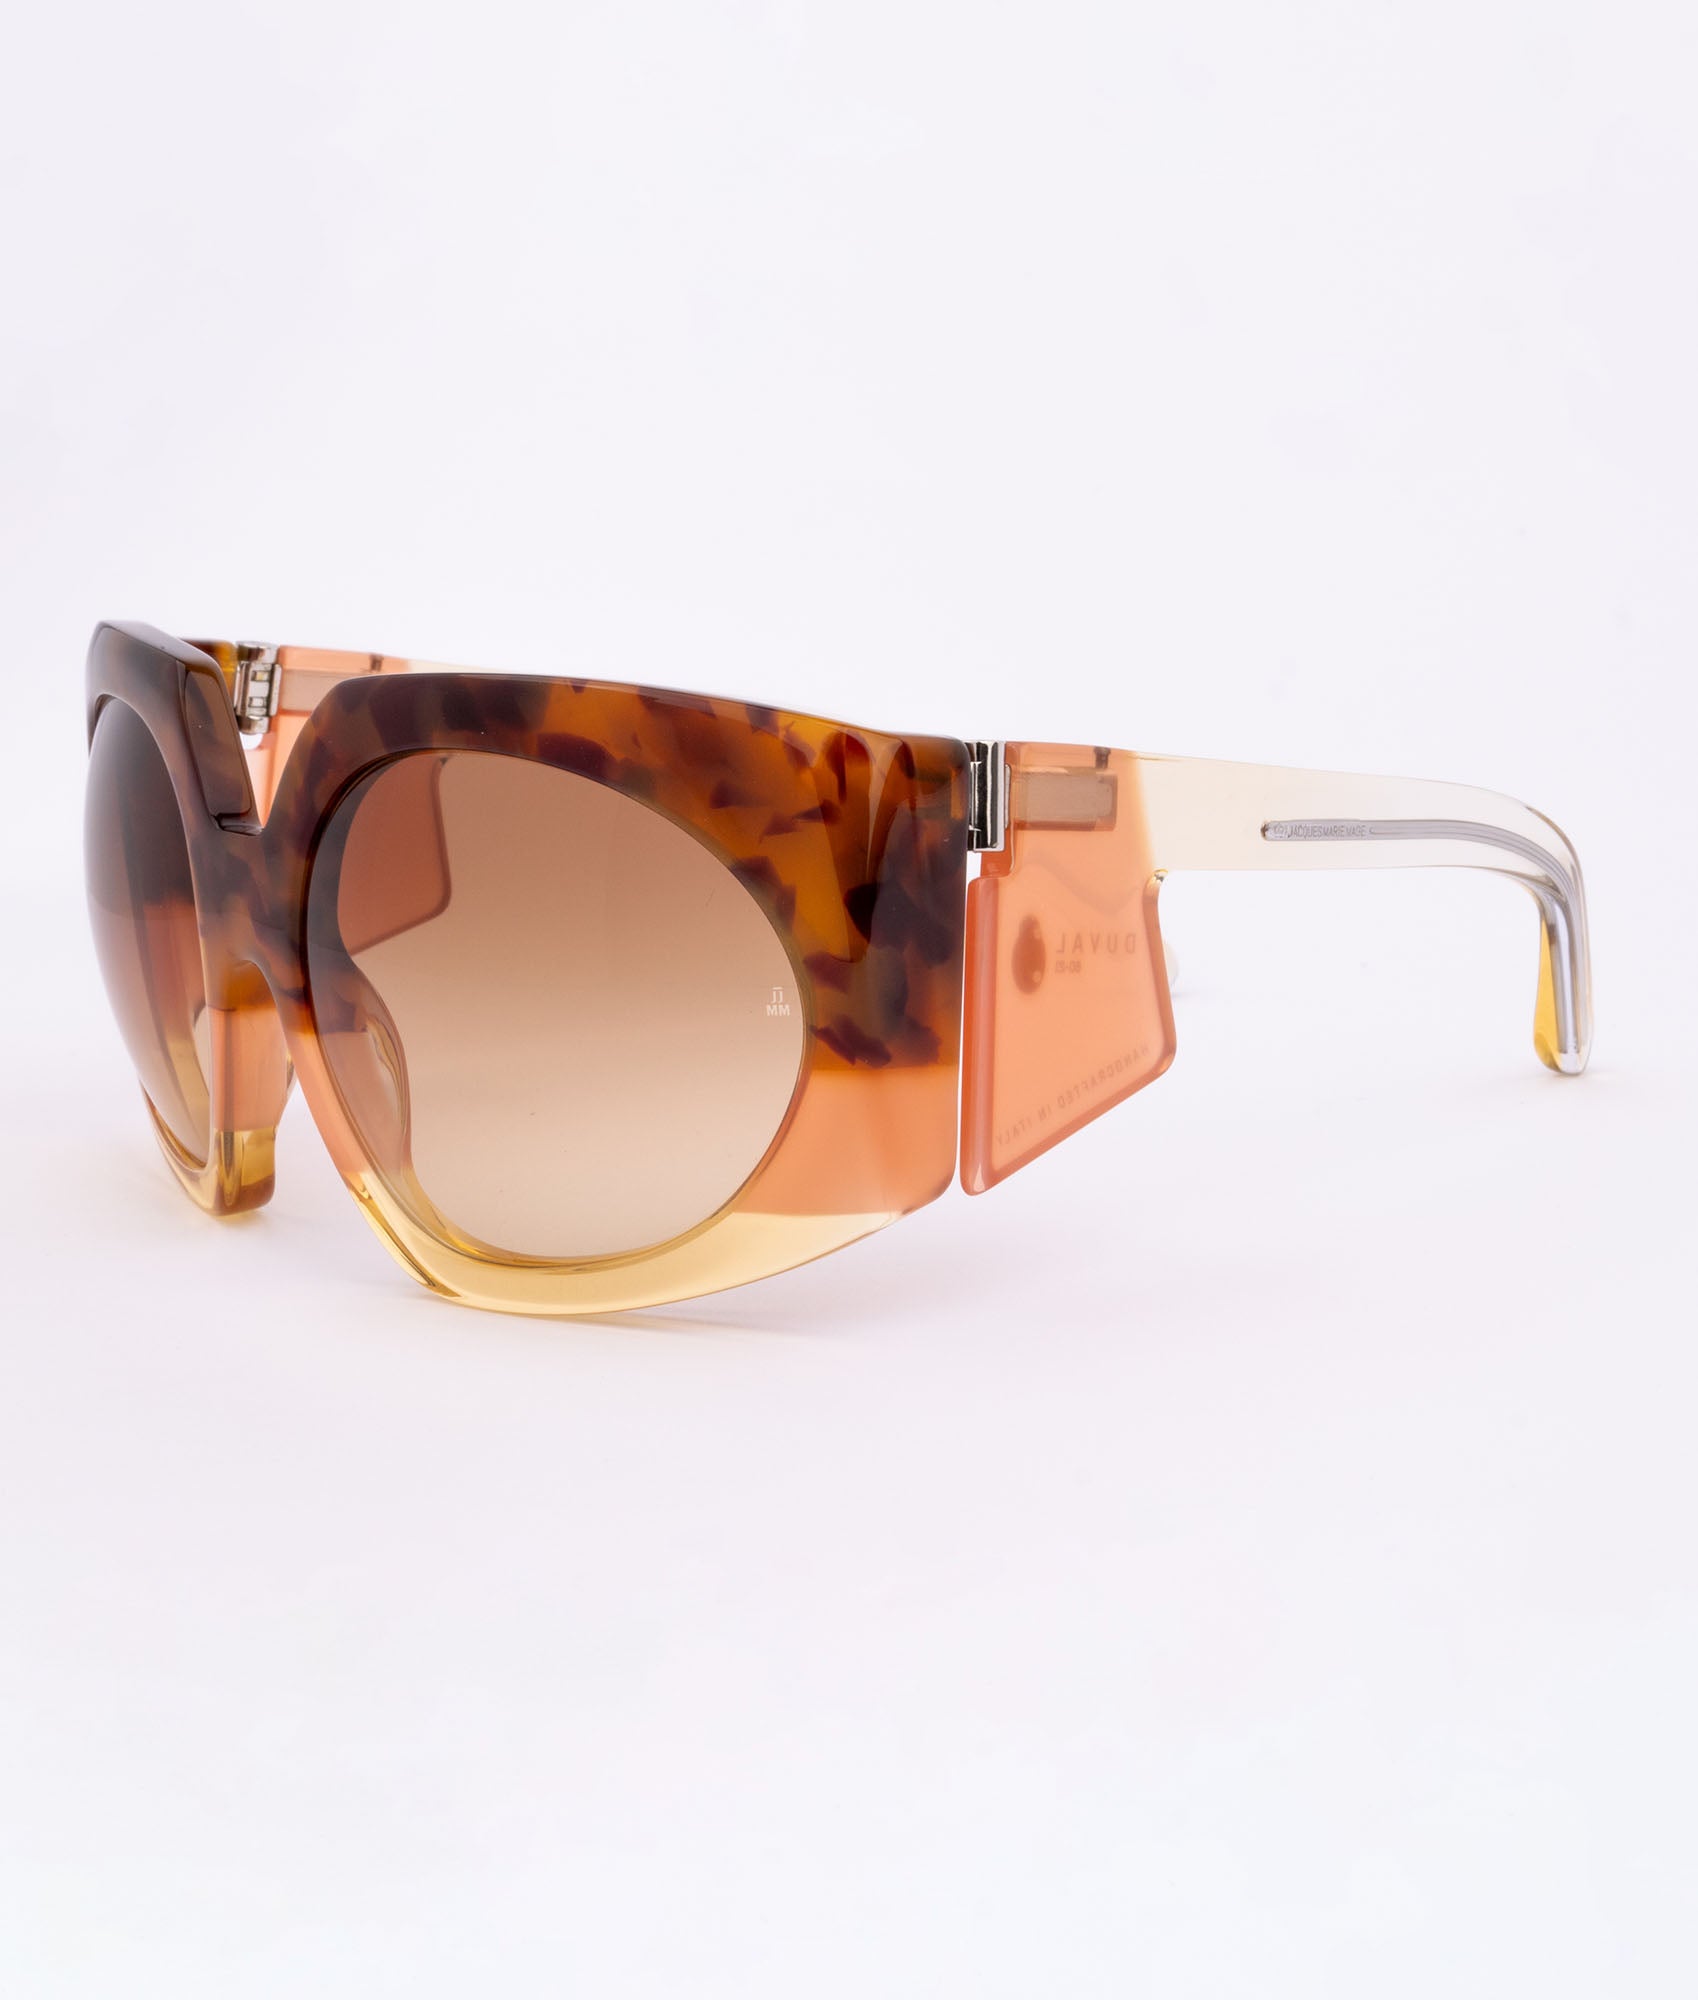 Jacques Marie Mage | DUVAL / SUNFADE LIGHT BRONZE / 59/15/130